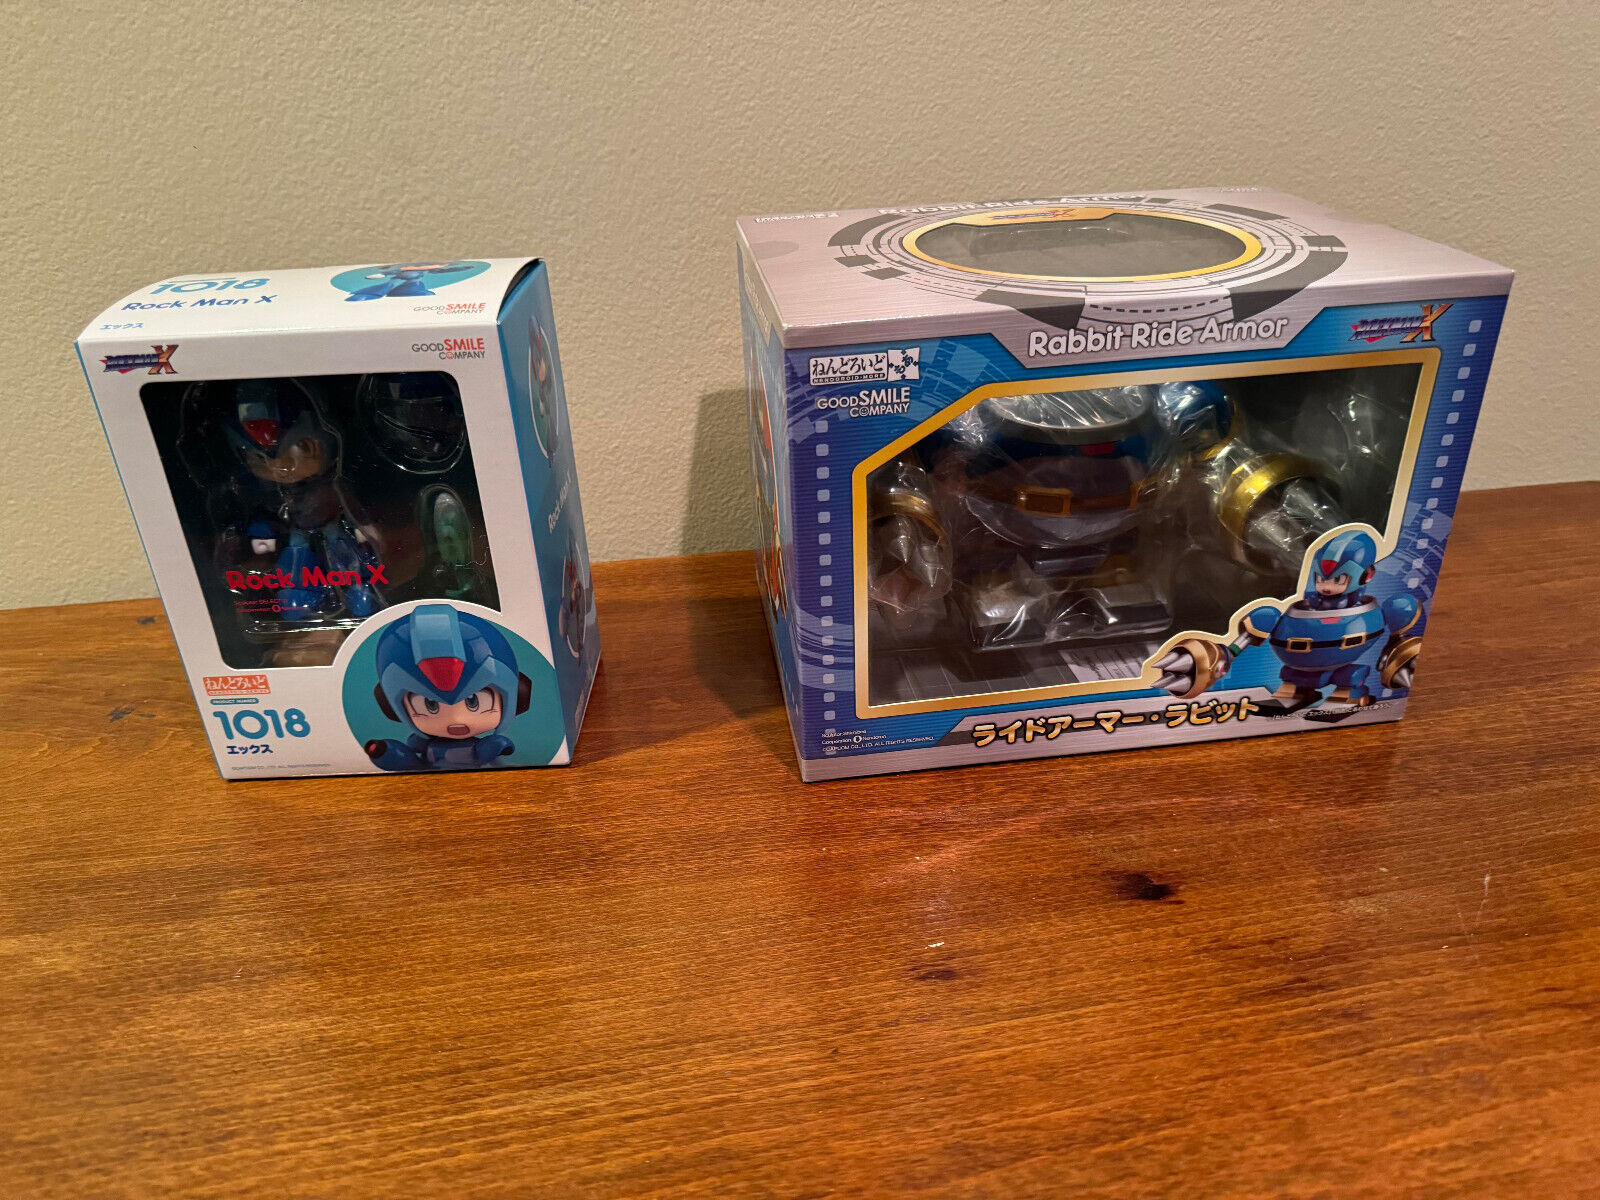 BRAND NEW/SEALED Nendoroid Mega Man X and Rabbit Ride Armor with Special Effect